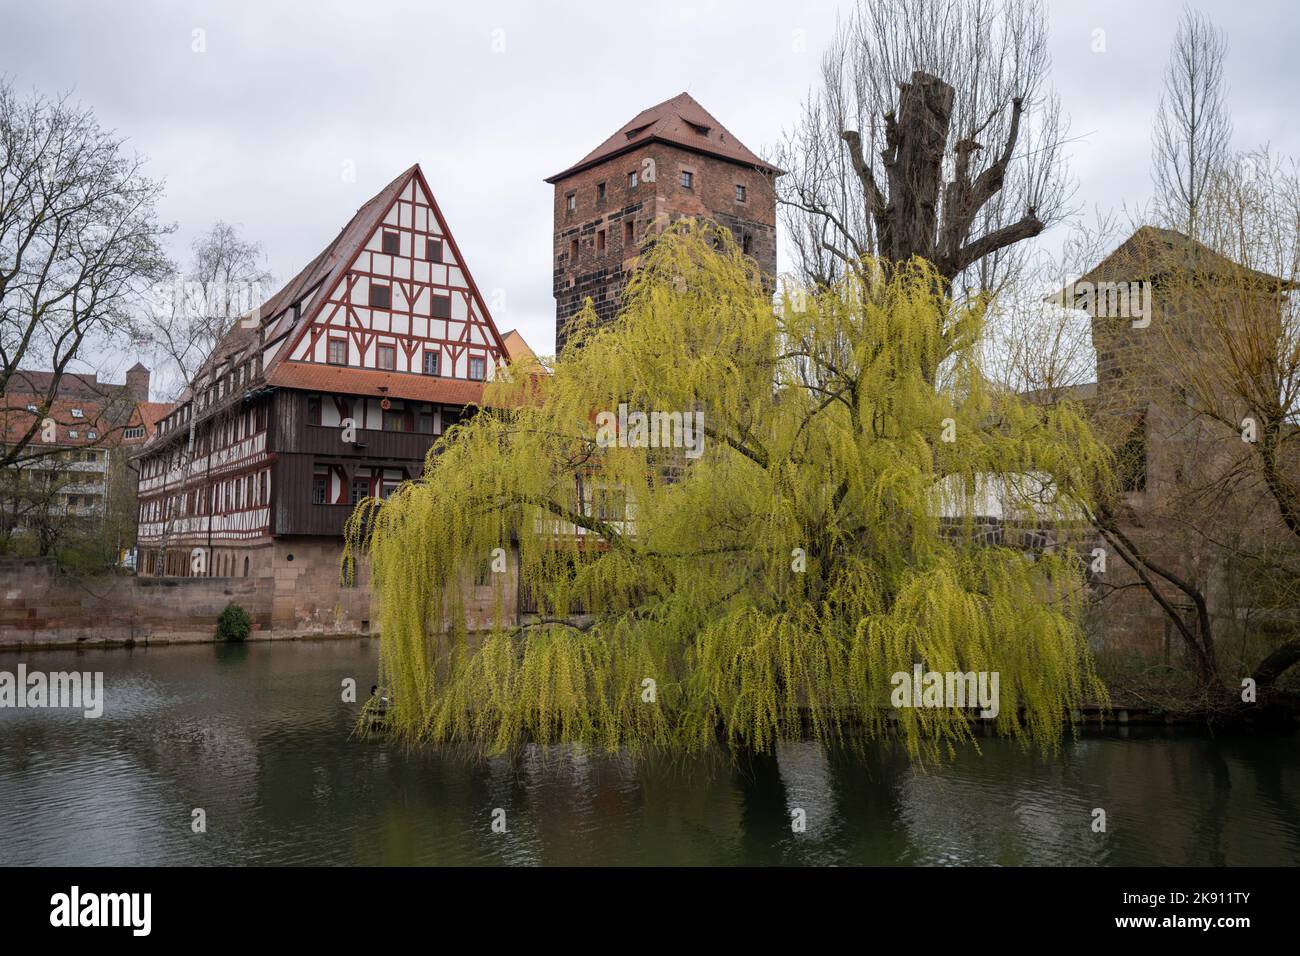 The old buildings on the bank of the Pegnitz river. Nuremberg, Germany. Stock Photo